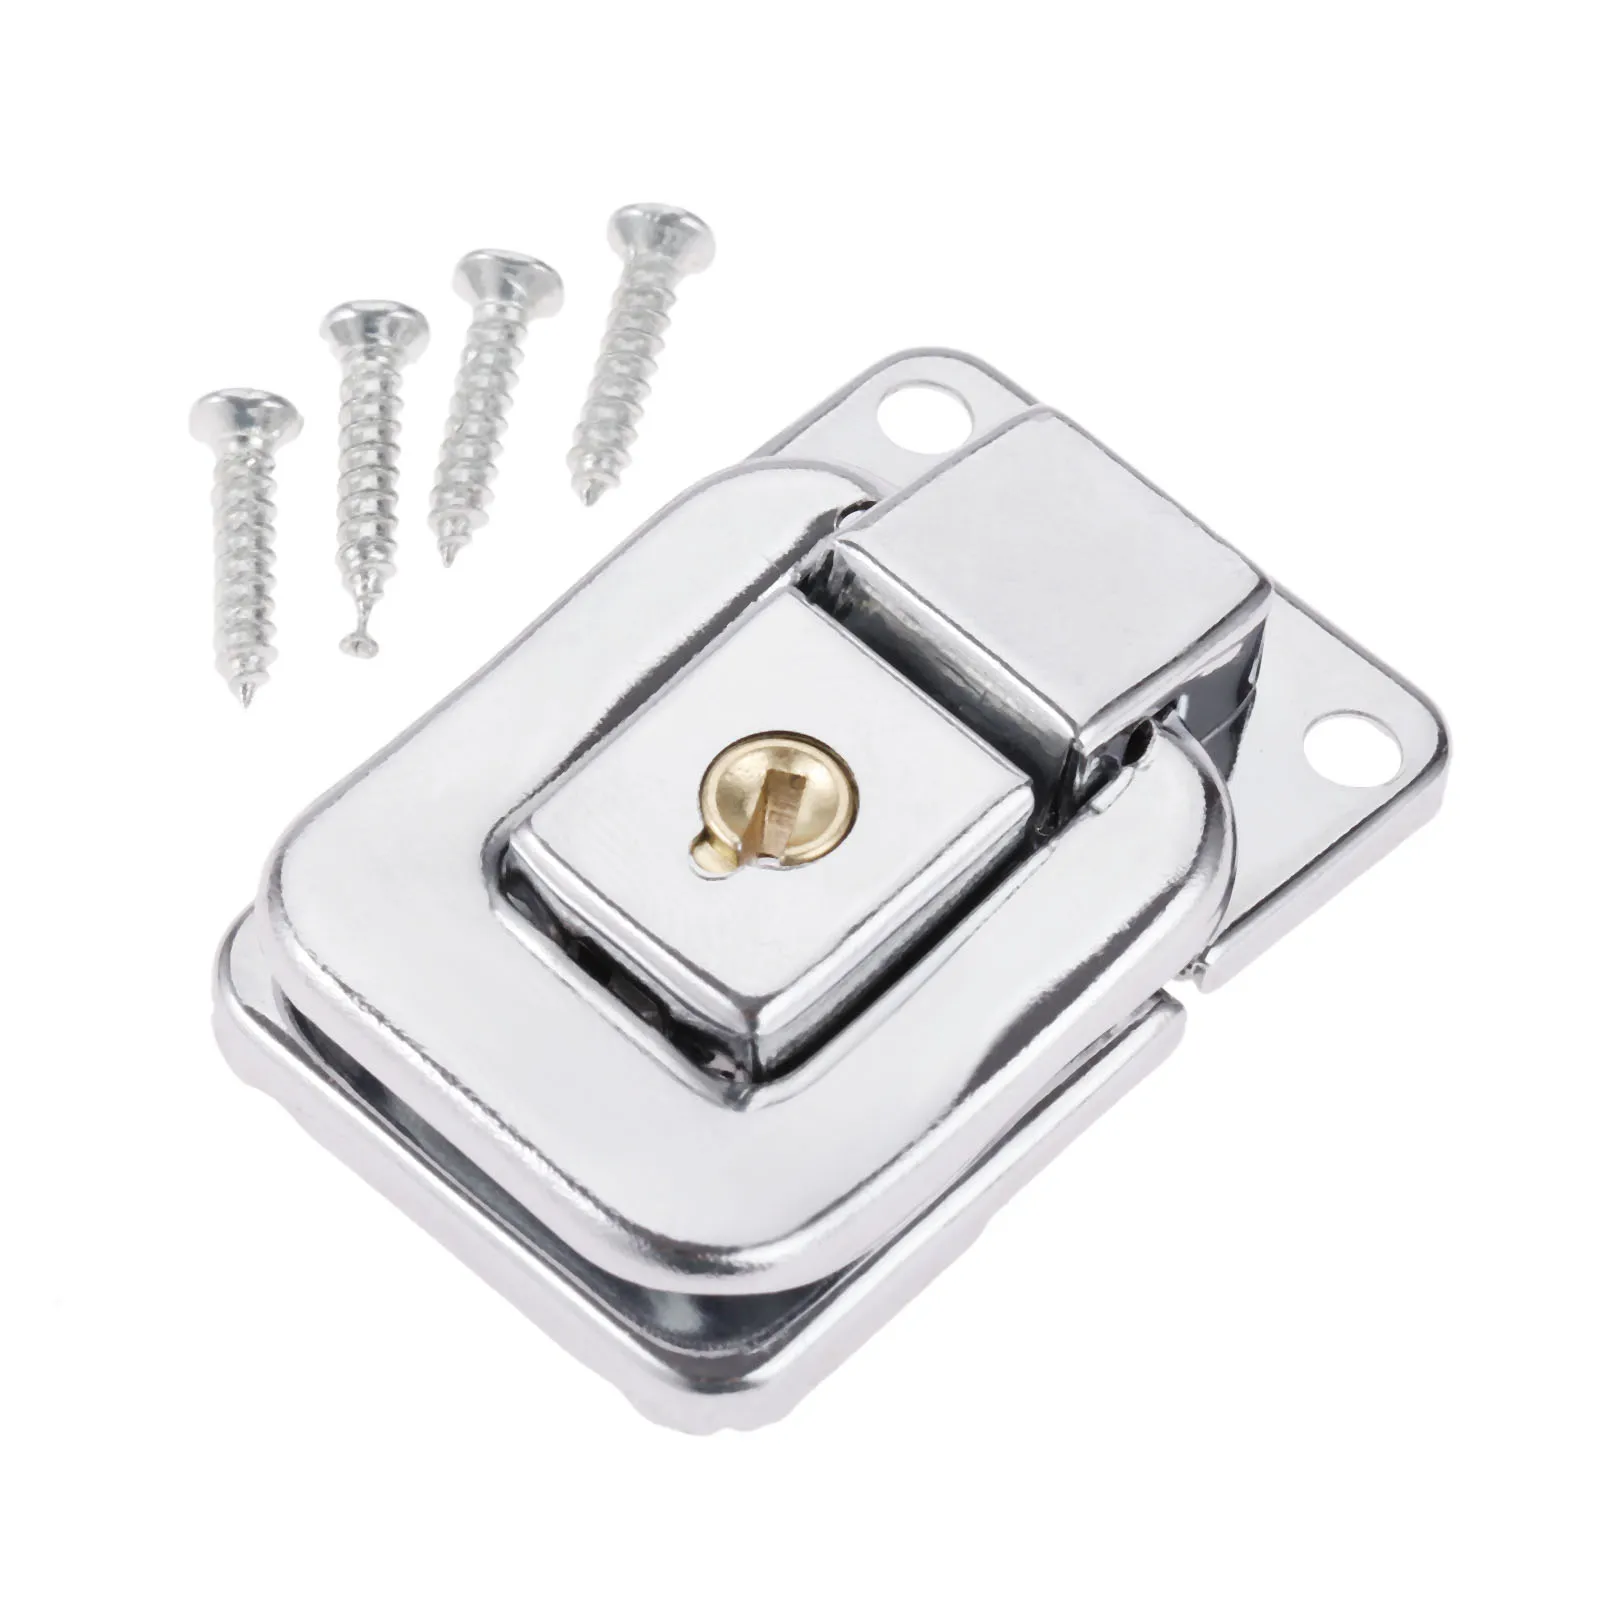 

Antique Box Hasps Latches Zinc Alloy Lock Toggle Catch for Jewelry Box Suitcase Buckle Clip Clasp Vintage Hardware 38*28mm